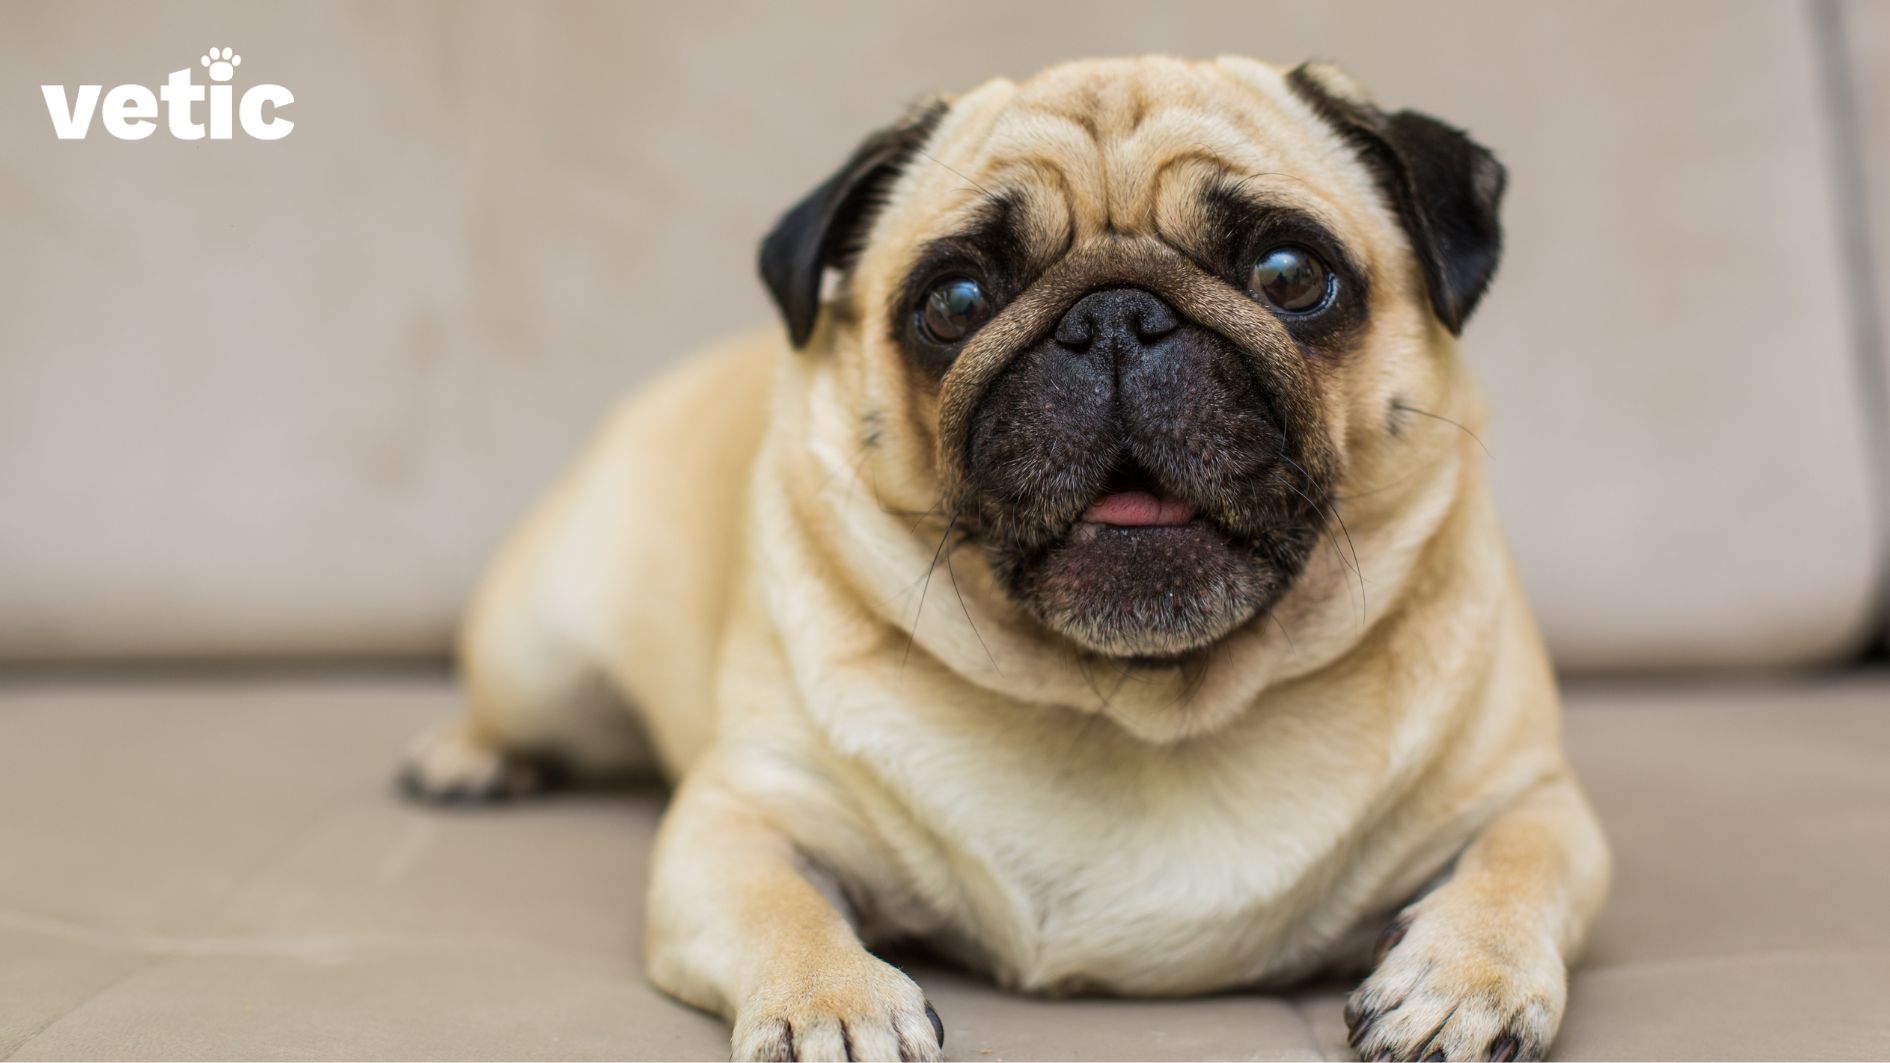 frontal vide of a pug breathing with his mouth open. flat-faced dog breeds often breathe with their mouths due to shortened and compressed nasal pathways